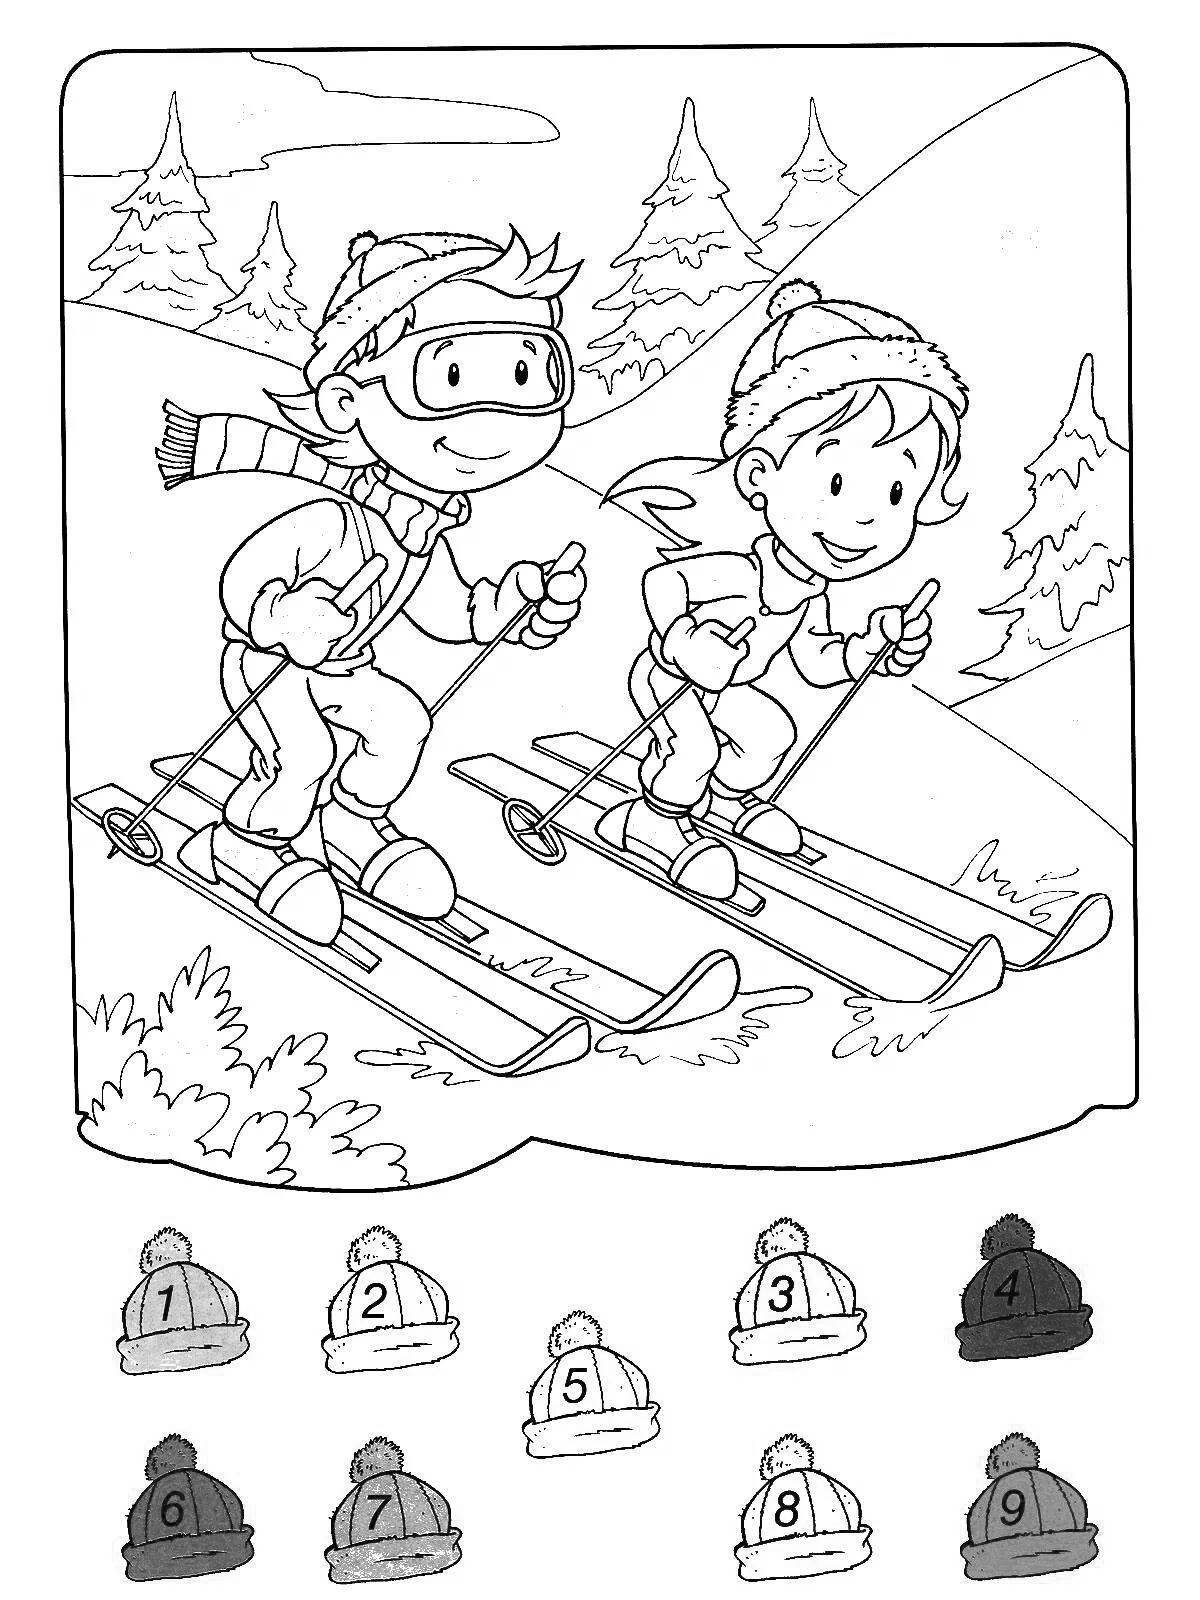 Inspirational winter sports coloring book for preschoolers